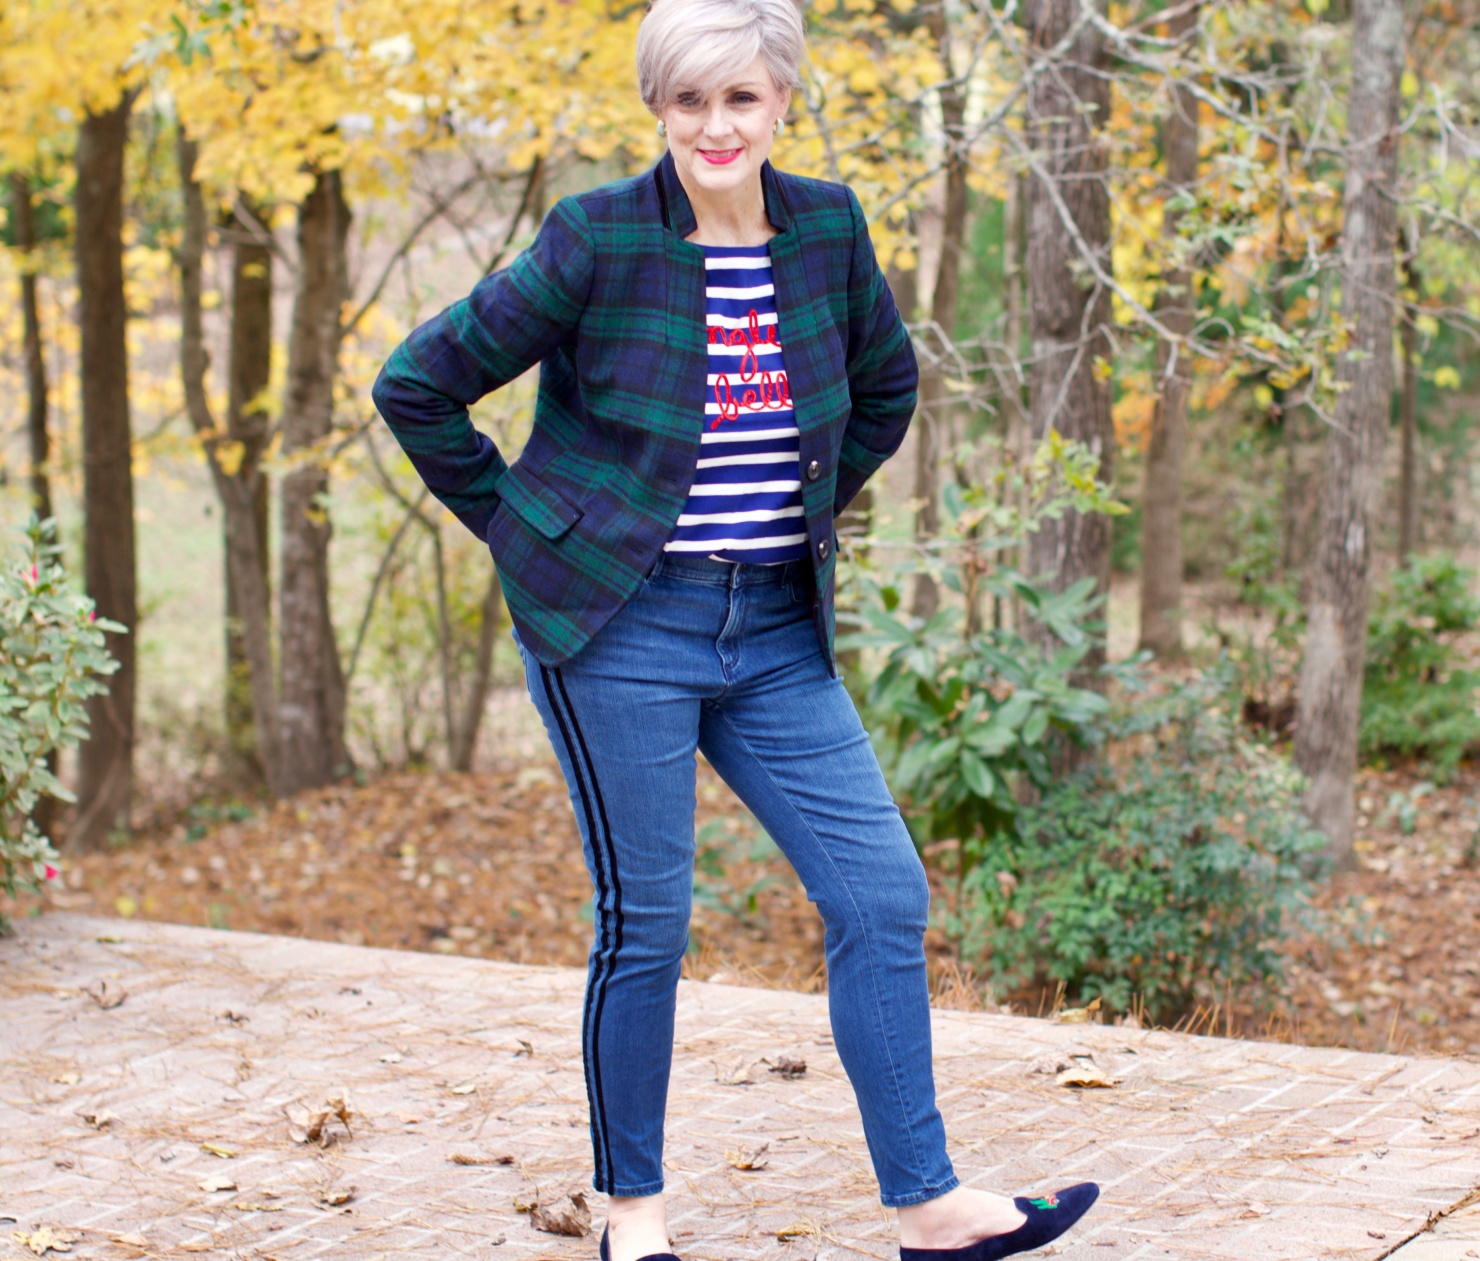 beth from Style at a Certain age wears velveteen black watch plaid pants, blue ribbed turtleneck, and loafers